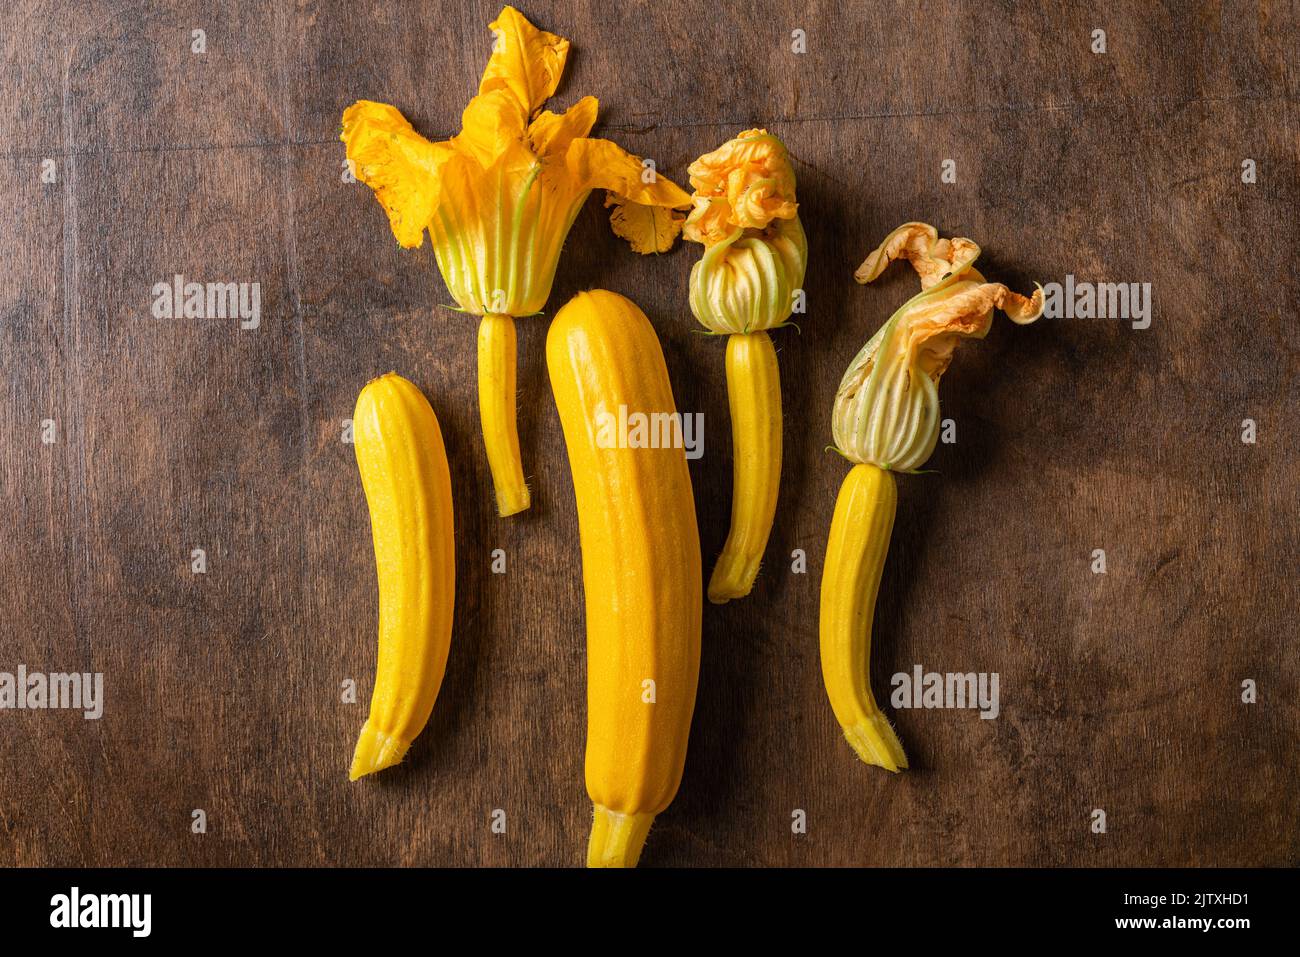 Fresh yellow zucchini or squash with flowers on wooden background. Top view. Organic vegan food. Fresh harvested vegetables. Stock Photo